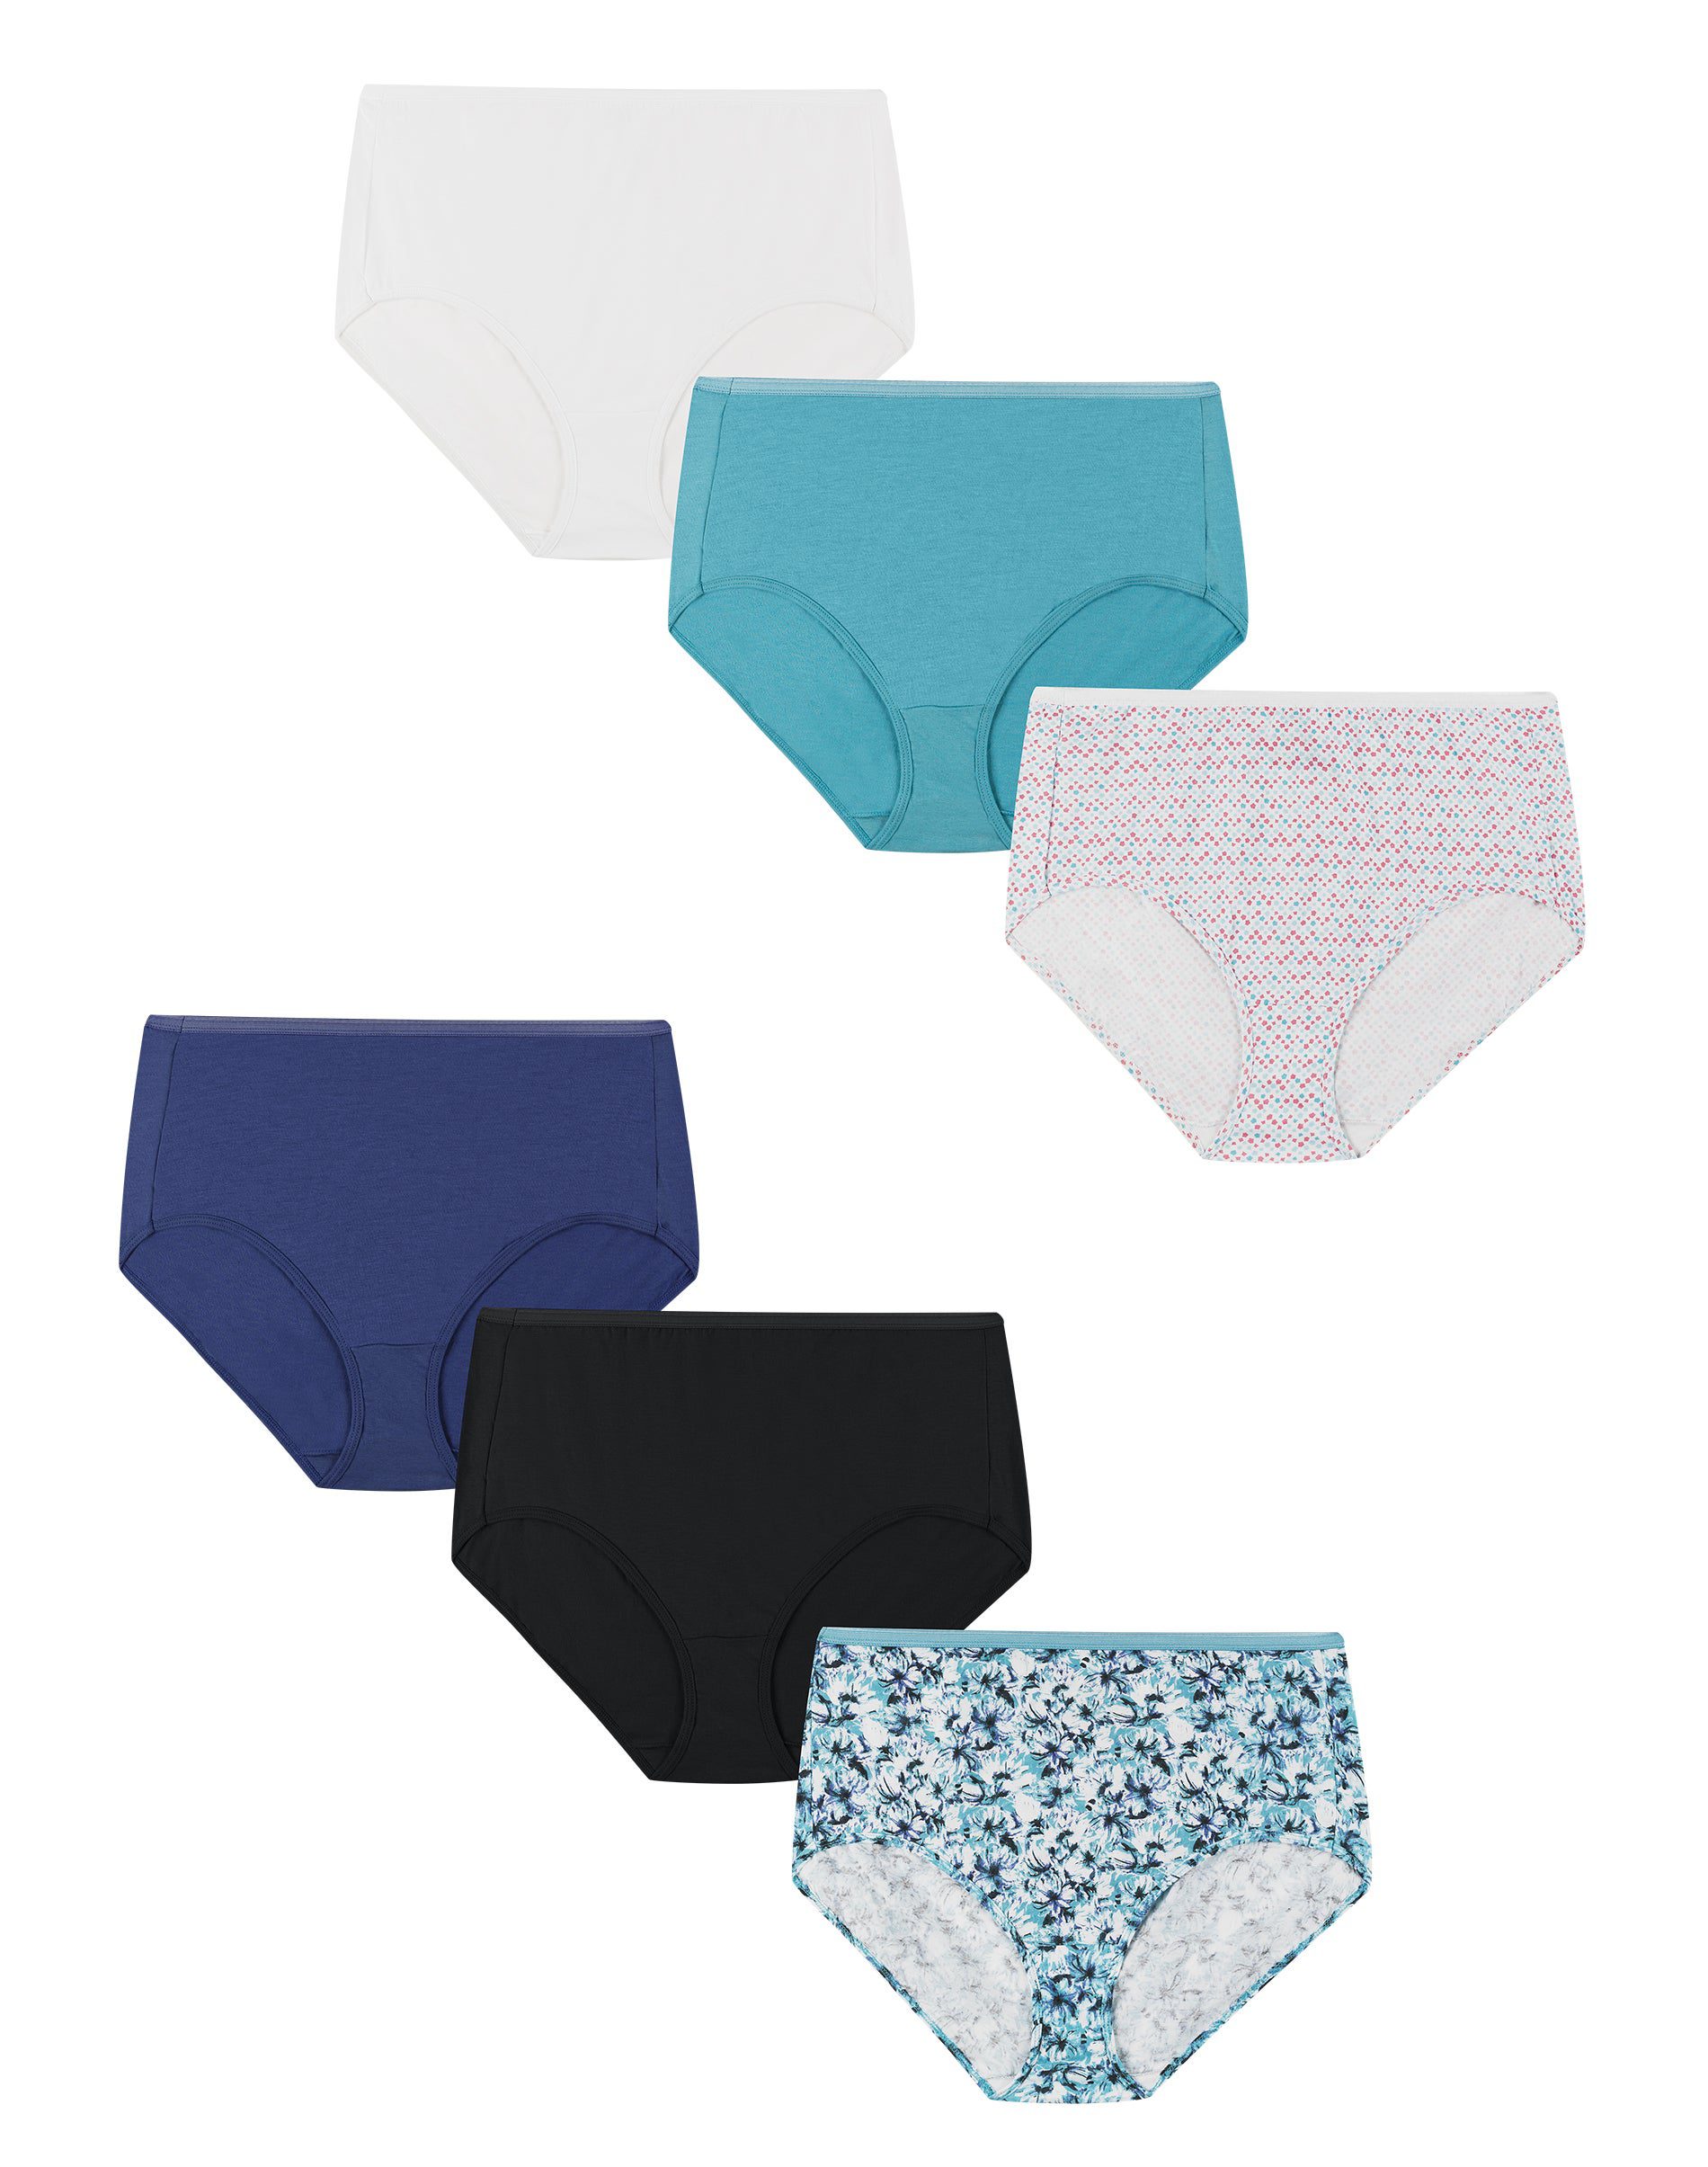 Hanes.com Just My Size JMS Cotton High Briefs Assorted, 6-Pack 16.00